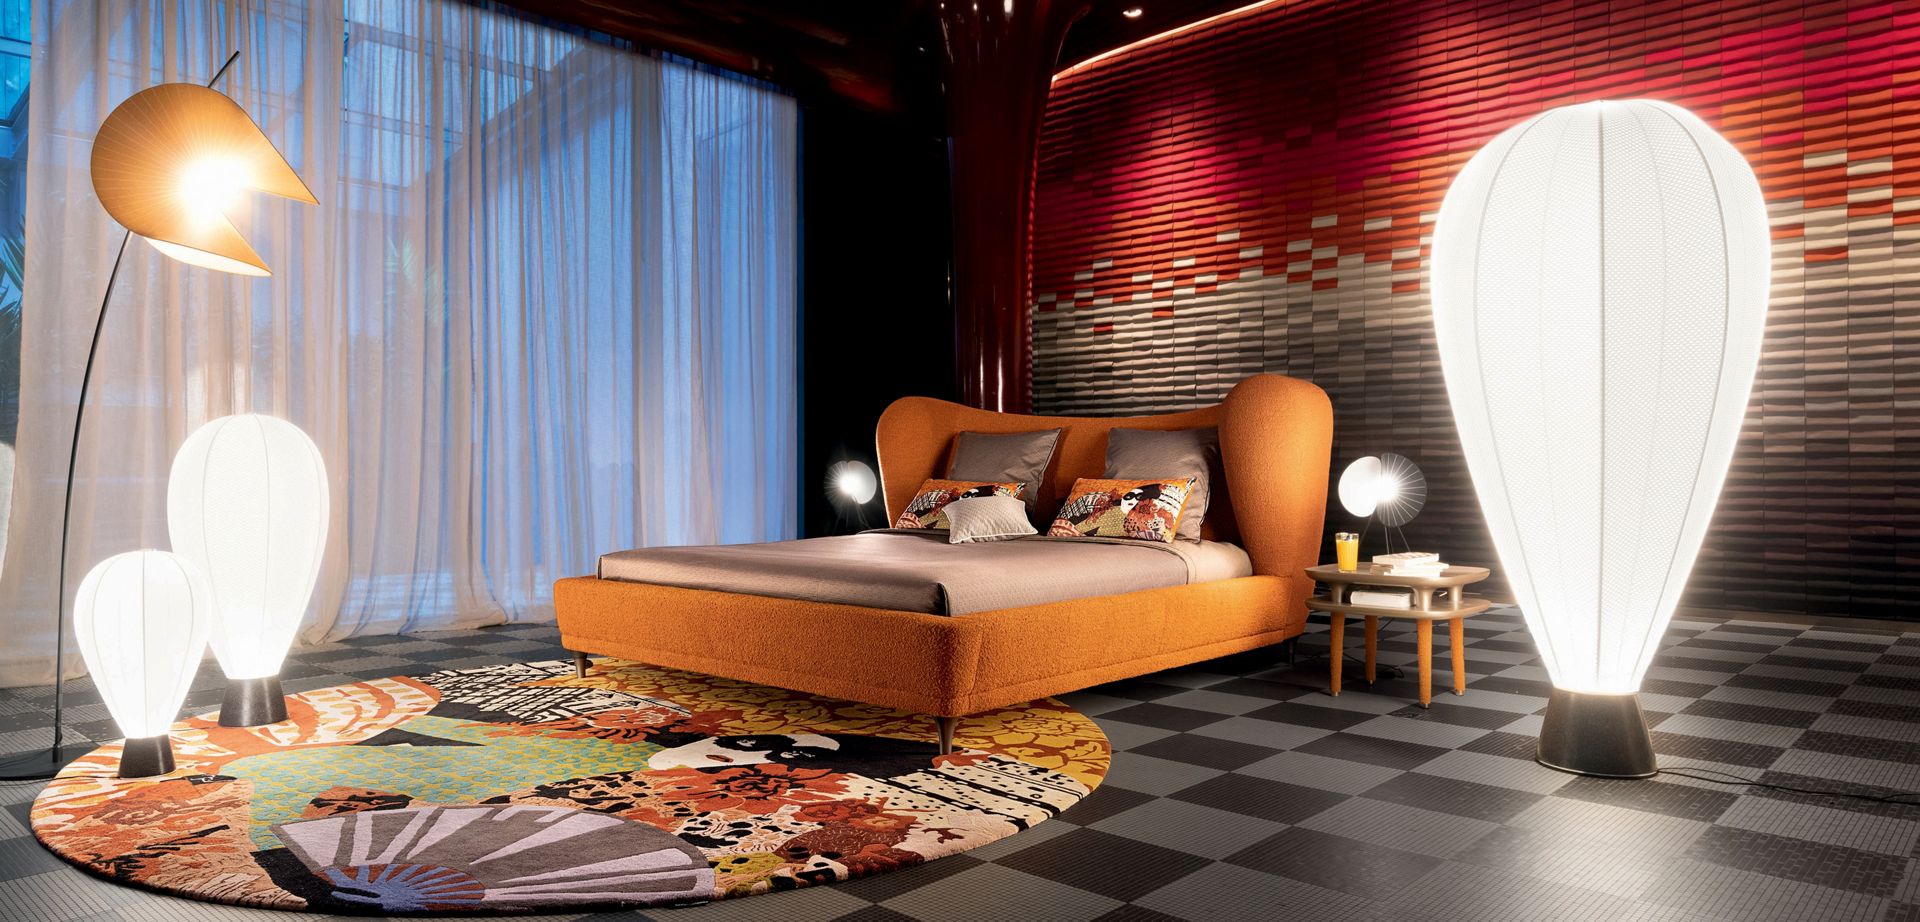 Globe Trotter, the new collectiond designed by Marcel Wanders for Roche  Bobois